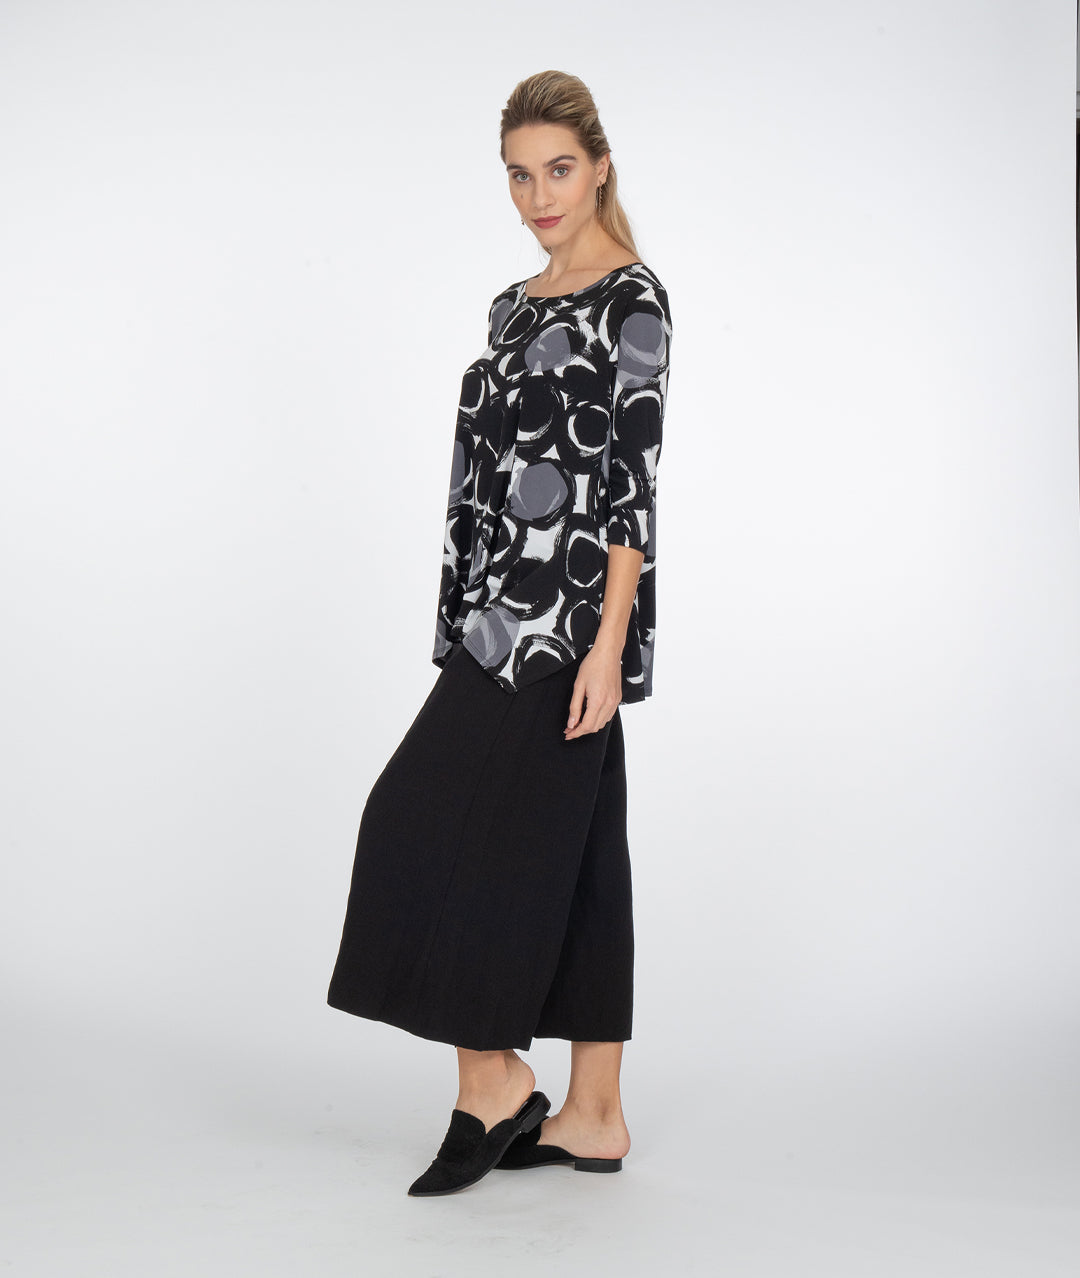 model in a wide leg black pant, with a black, white and grey circle print top with a hankerchief hem